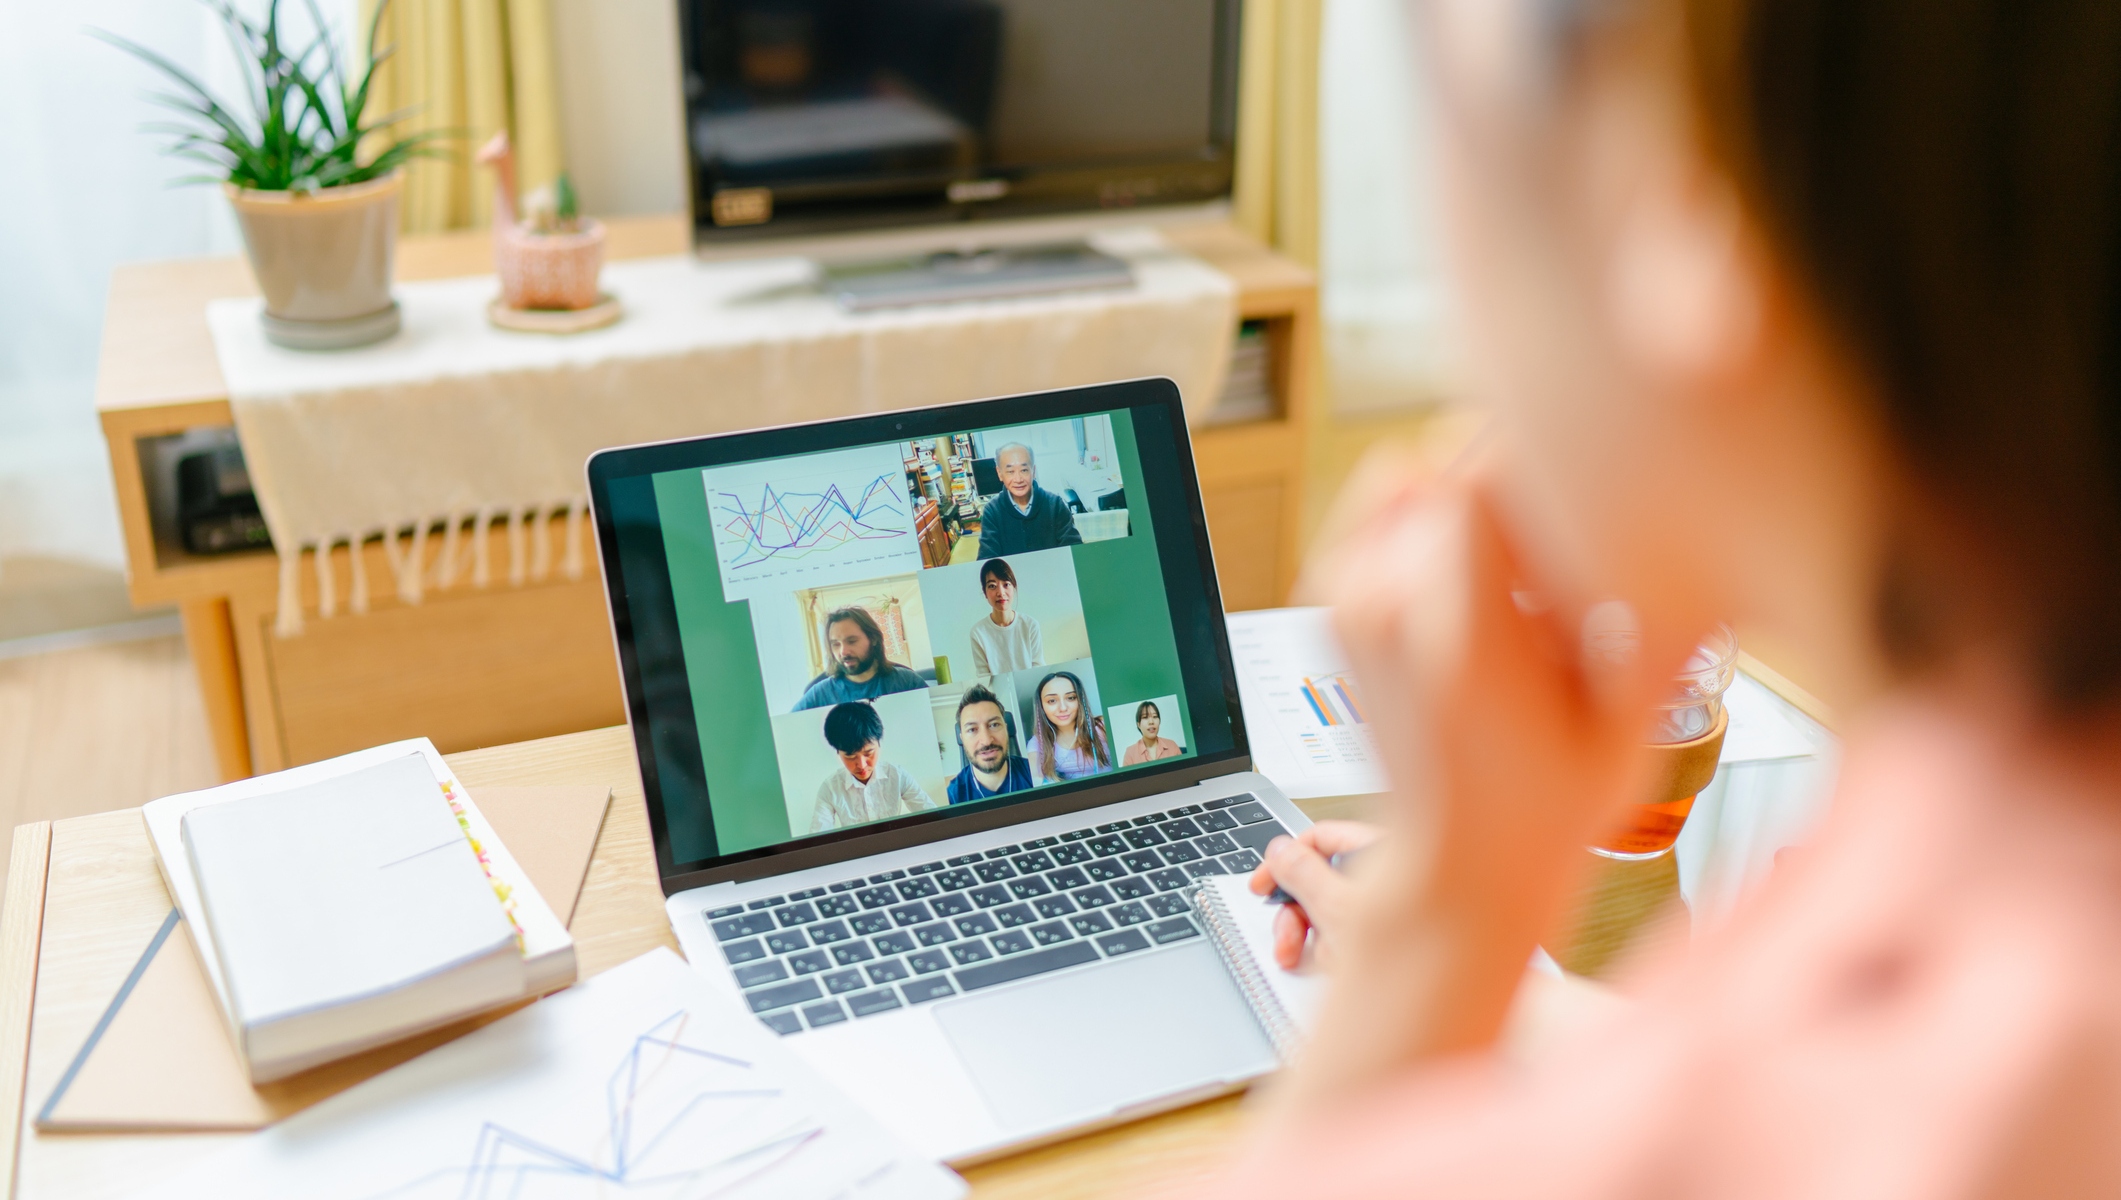 Why remote learning takes new ways of thinking Folio